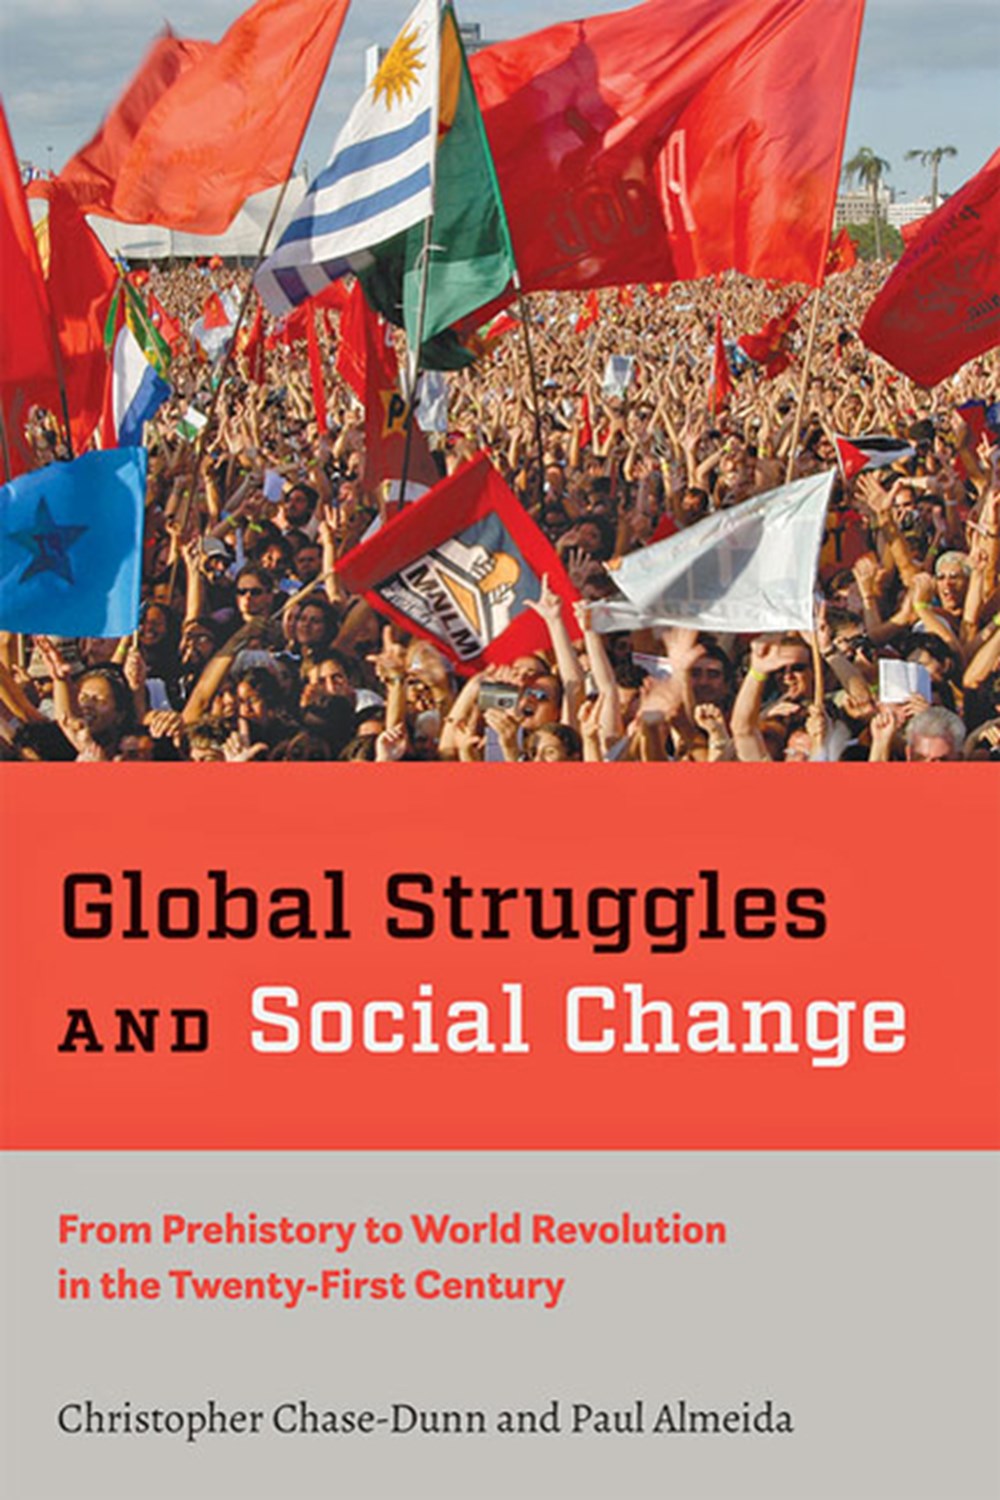 Global Struggles and Social Change: From Prehistory to World Revolution in the Twenty-First Century